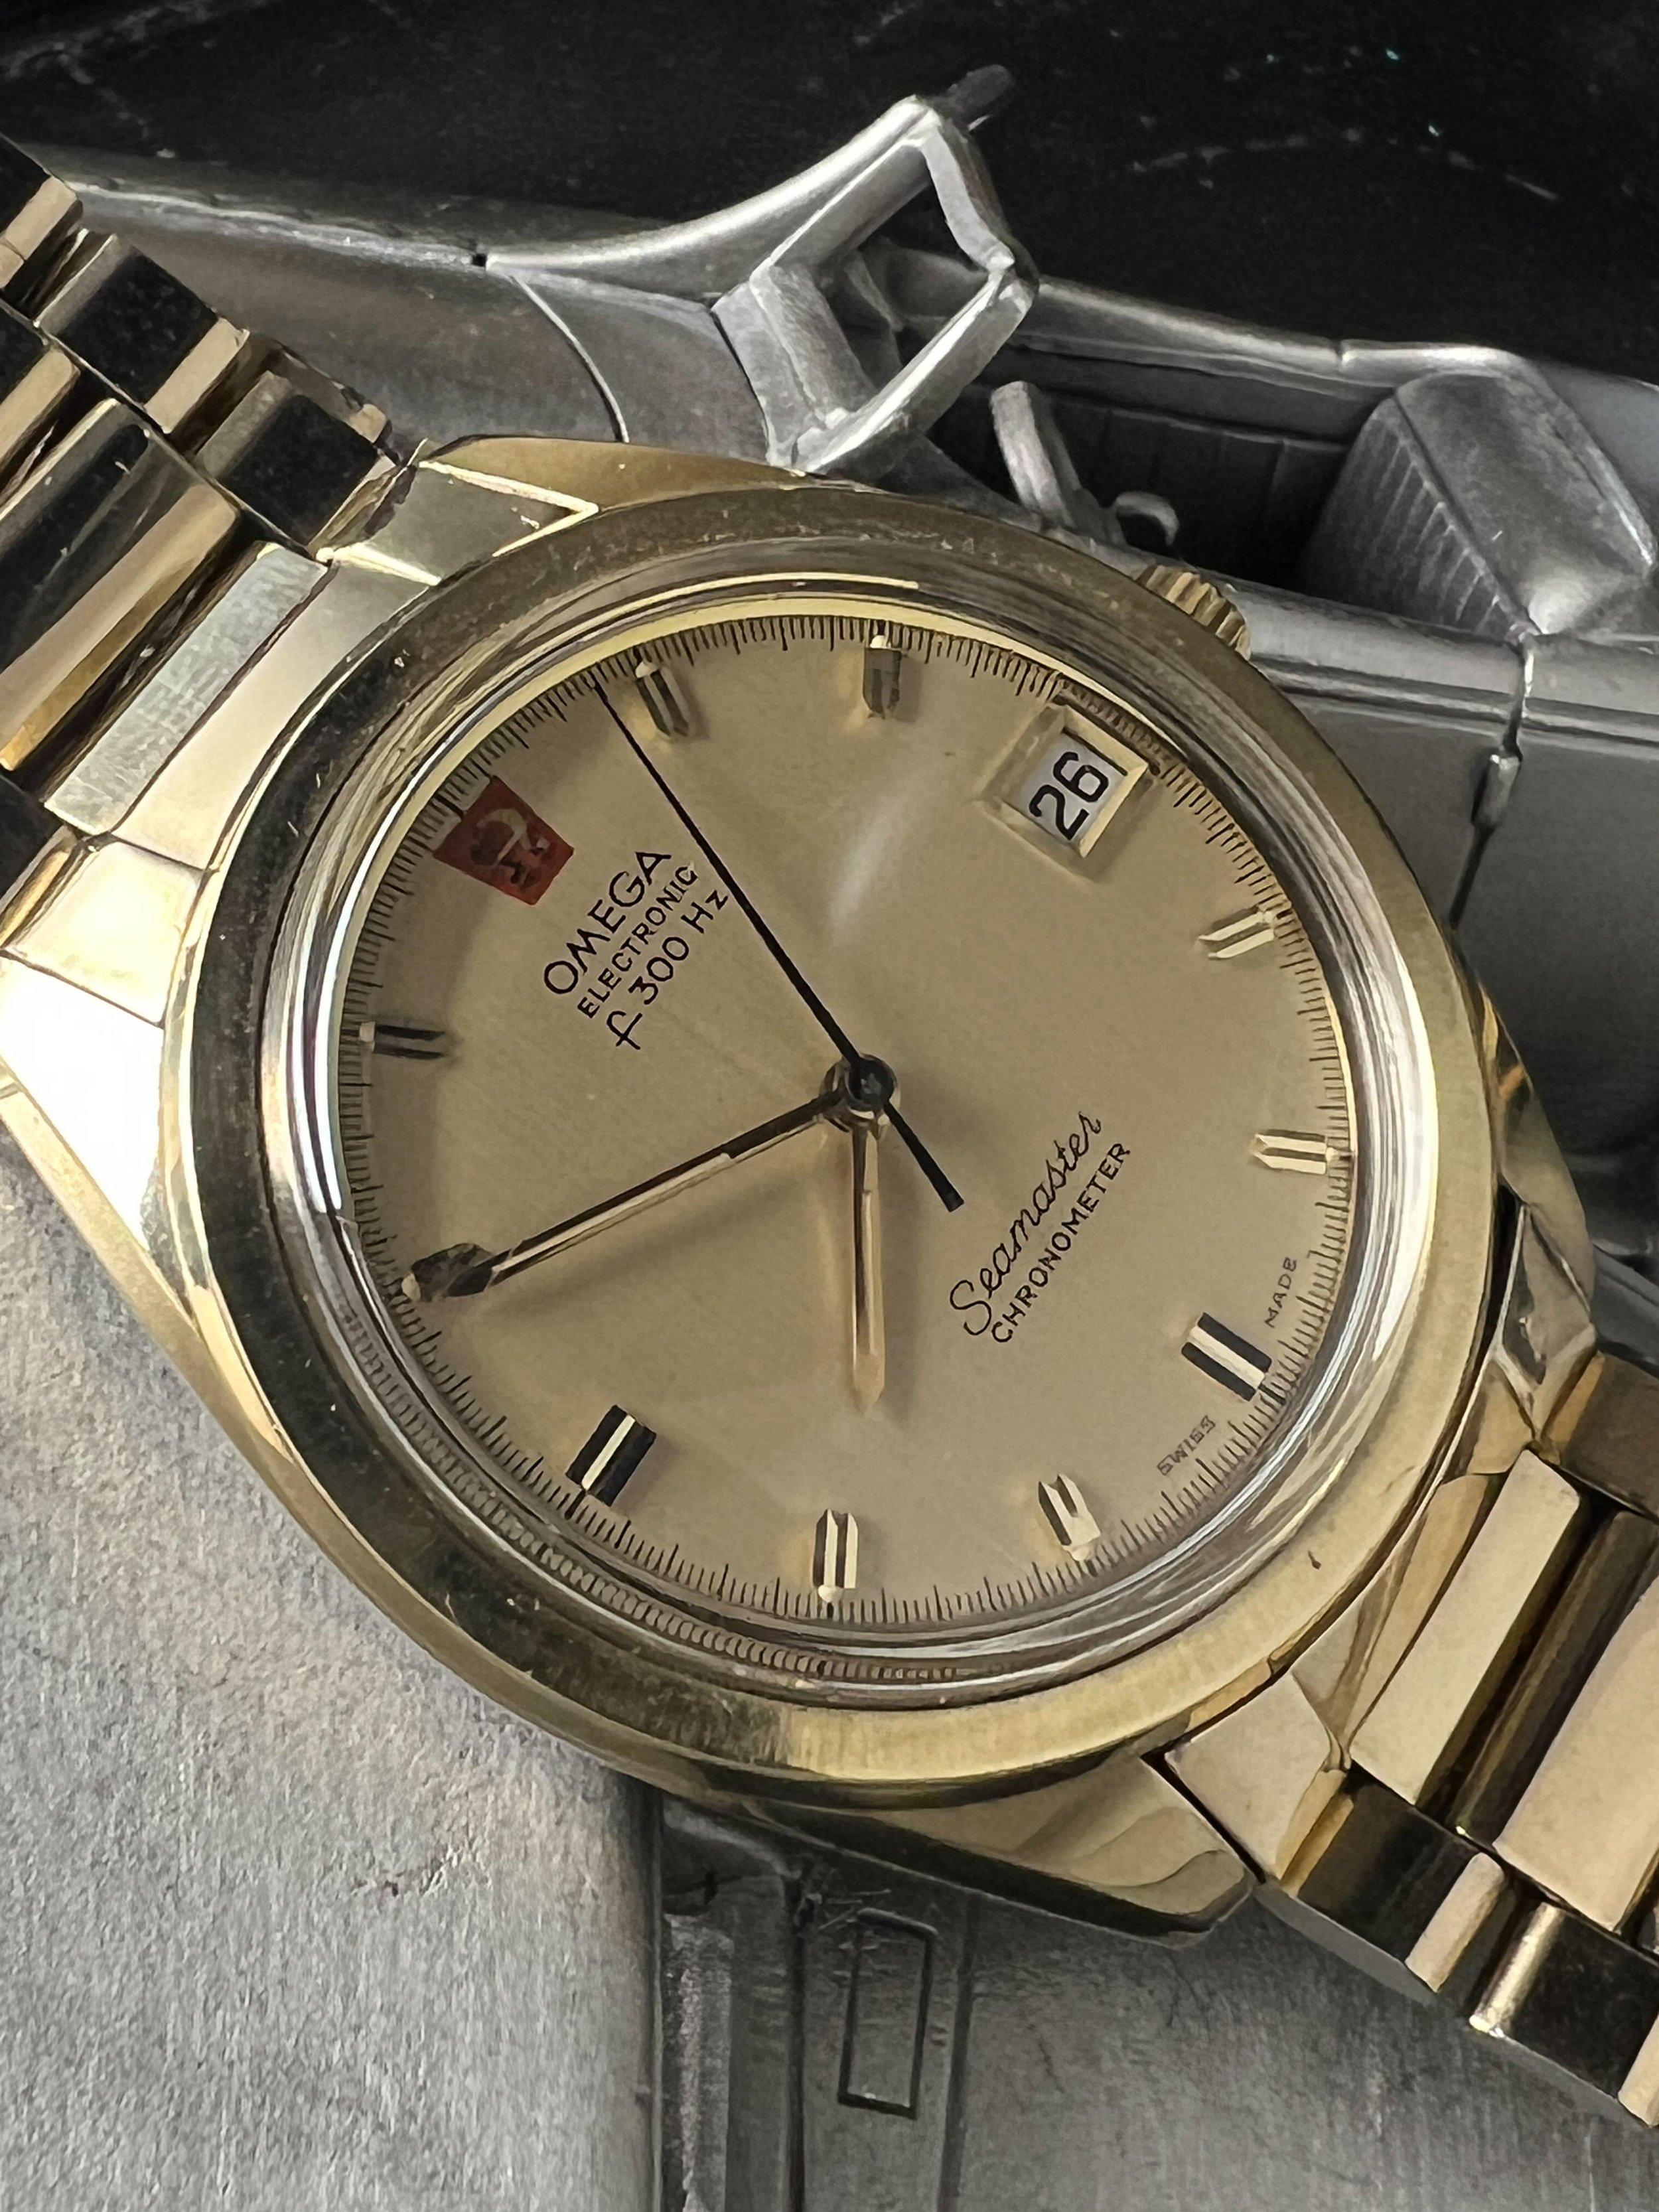 1970's Omega Seamaster Chronometer f300hz — Cool Vintage Watches